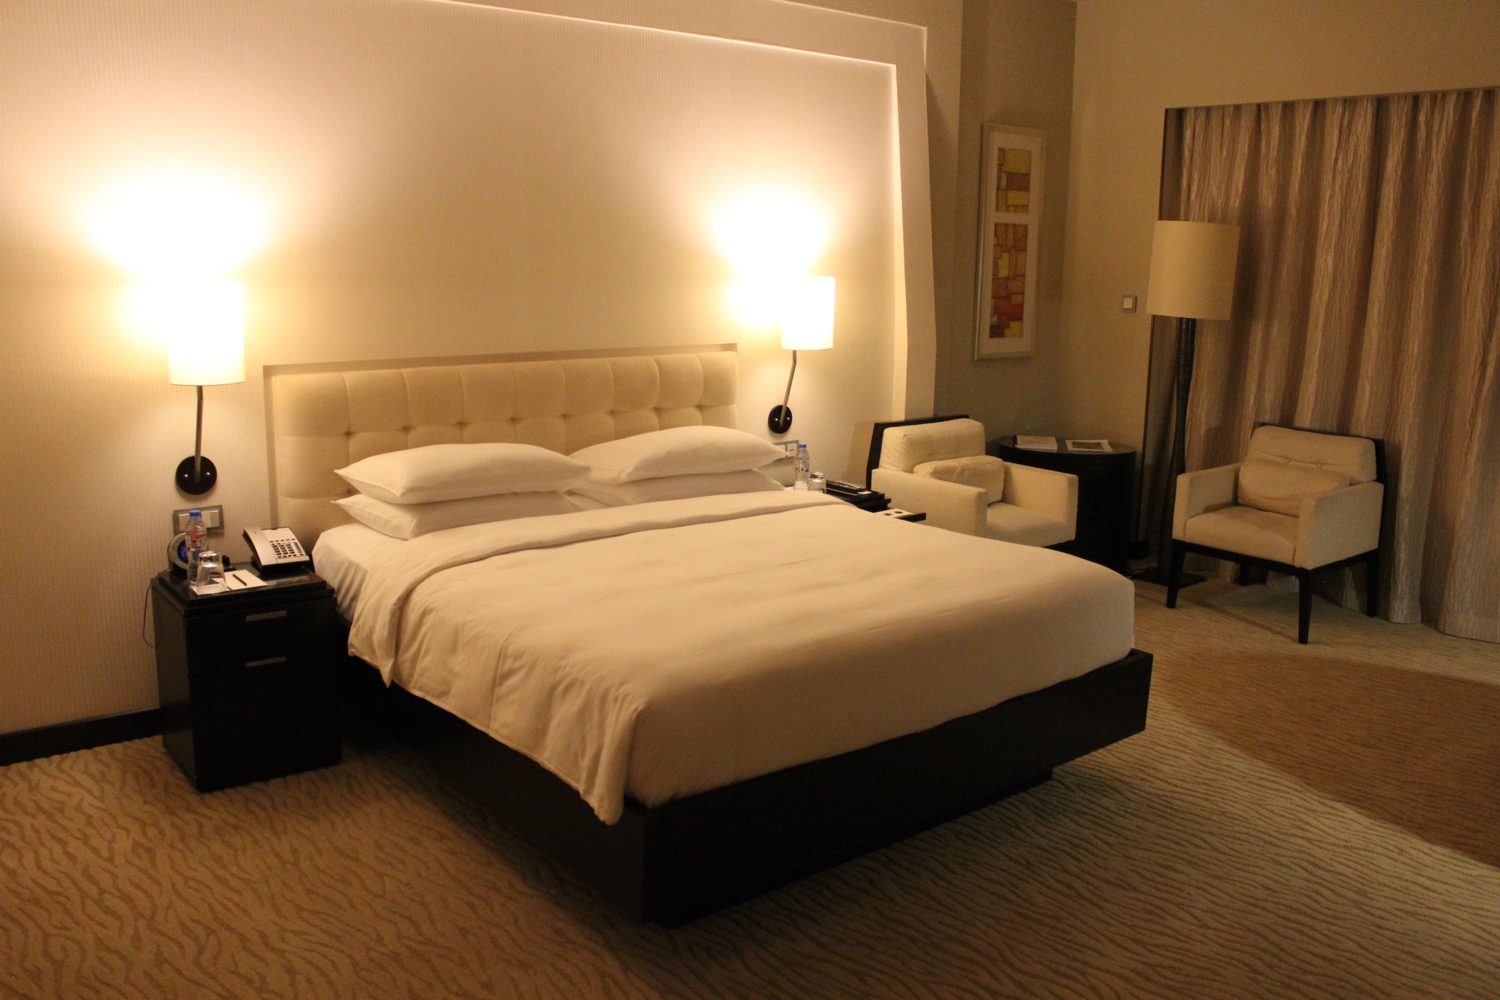 a bed with white sheets and a white headboard